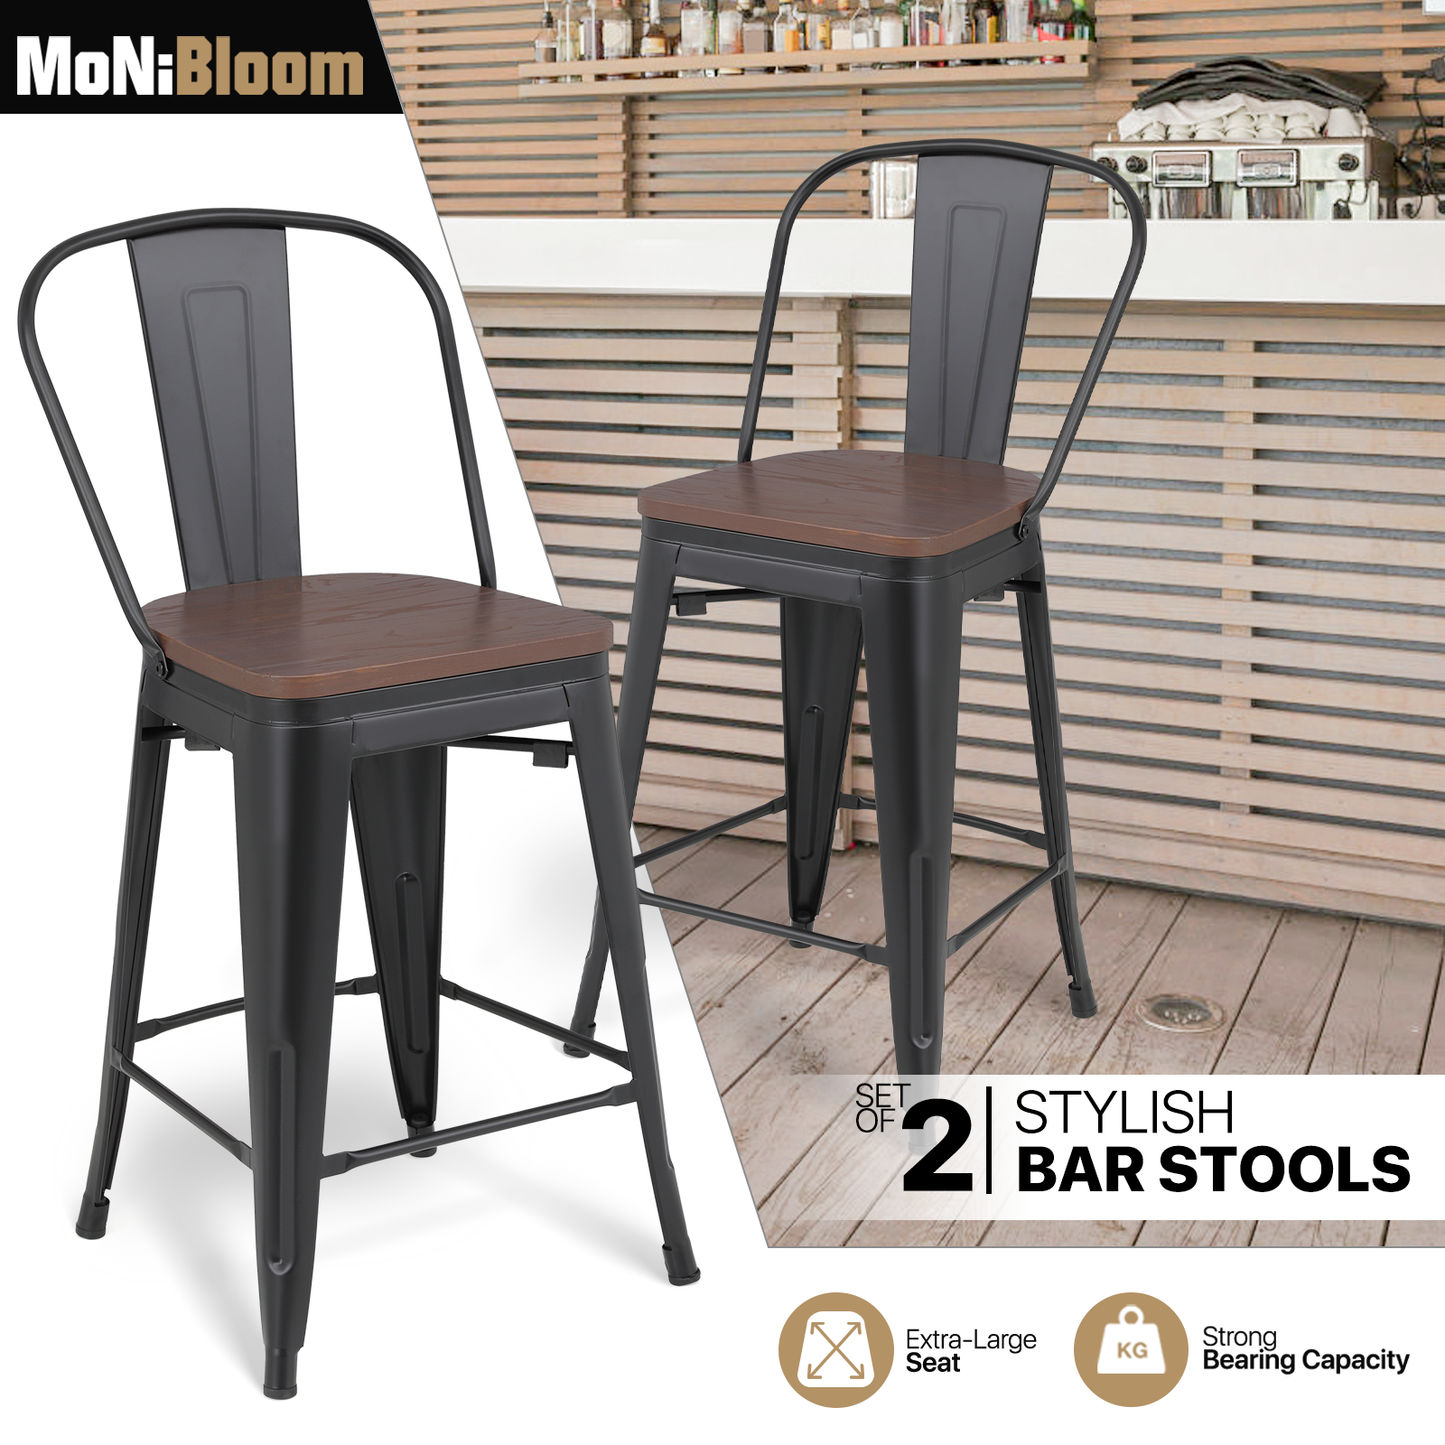 2 Pieces Bar Chairs - Metal Frame w/Wooden Seat - 24.5'' Seat to Floor